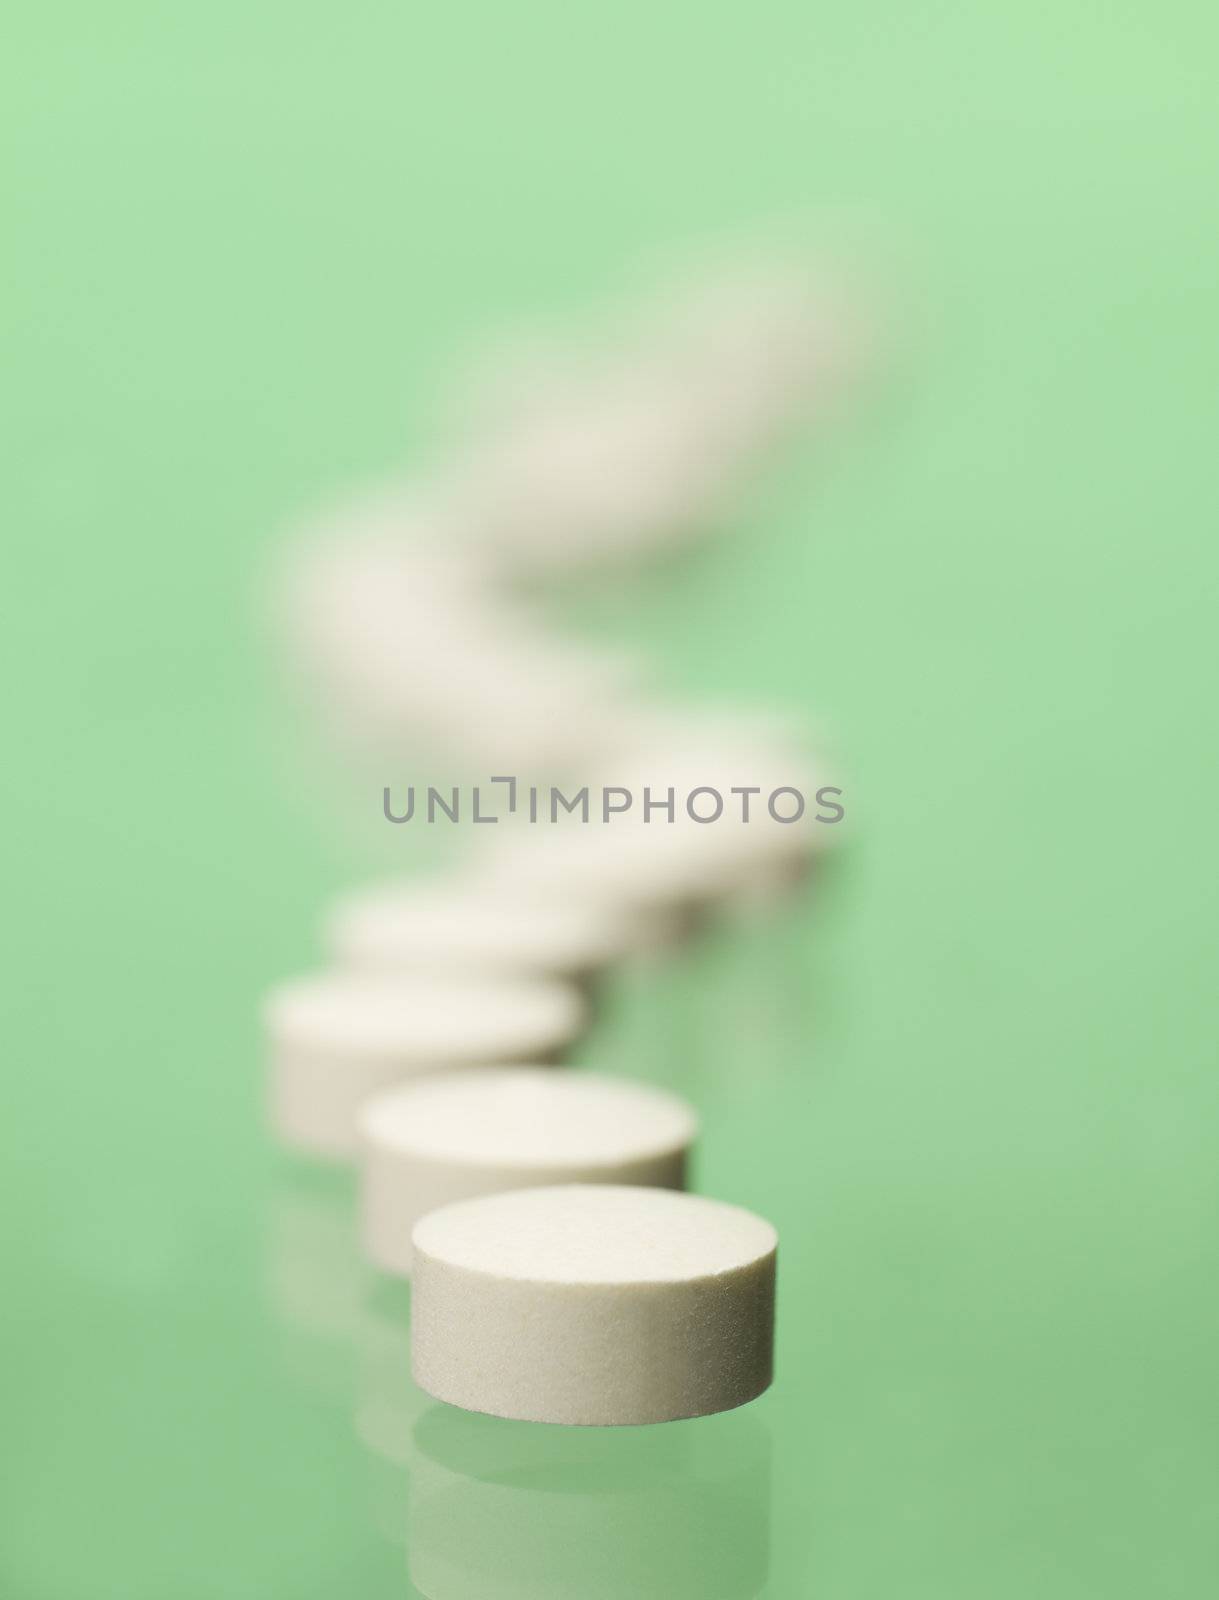 Pills in a row towards green background